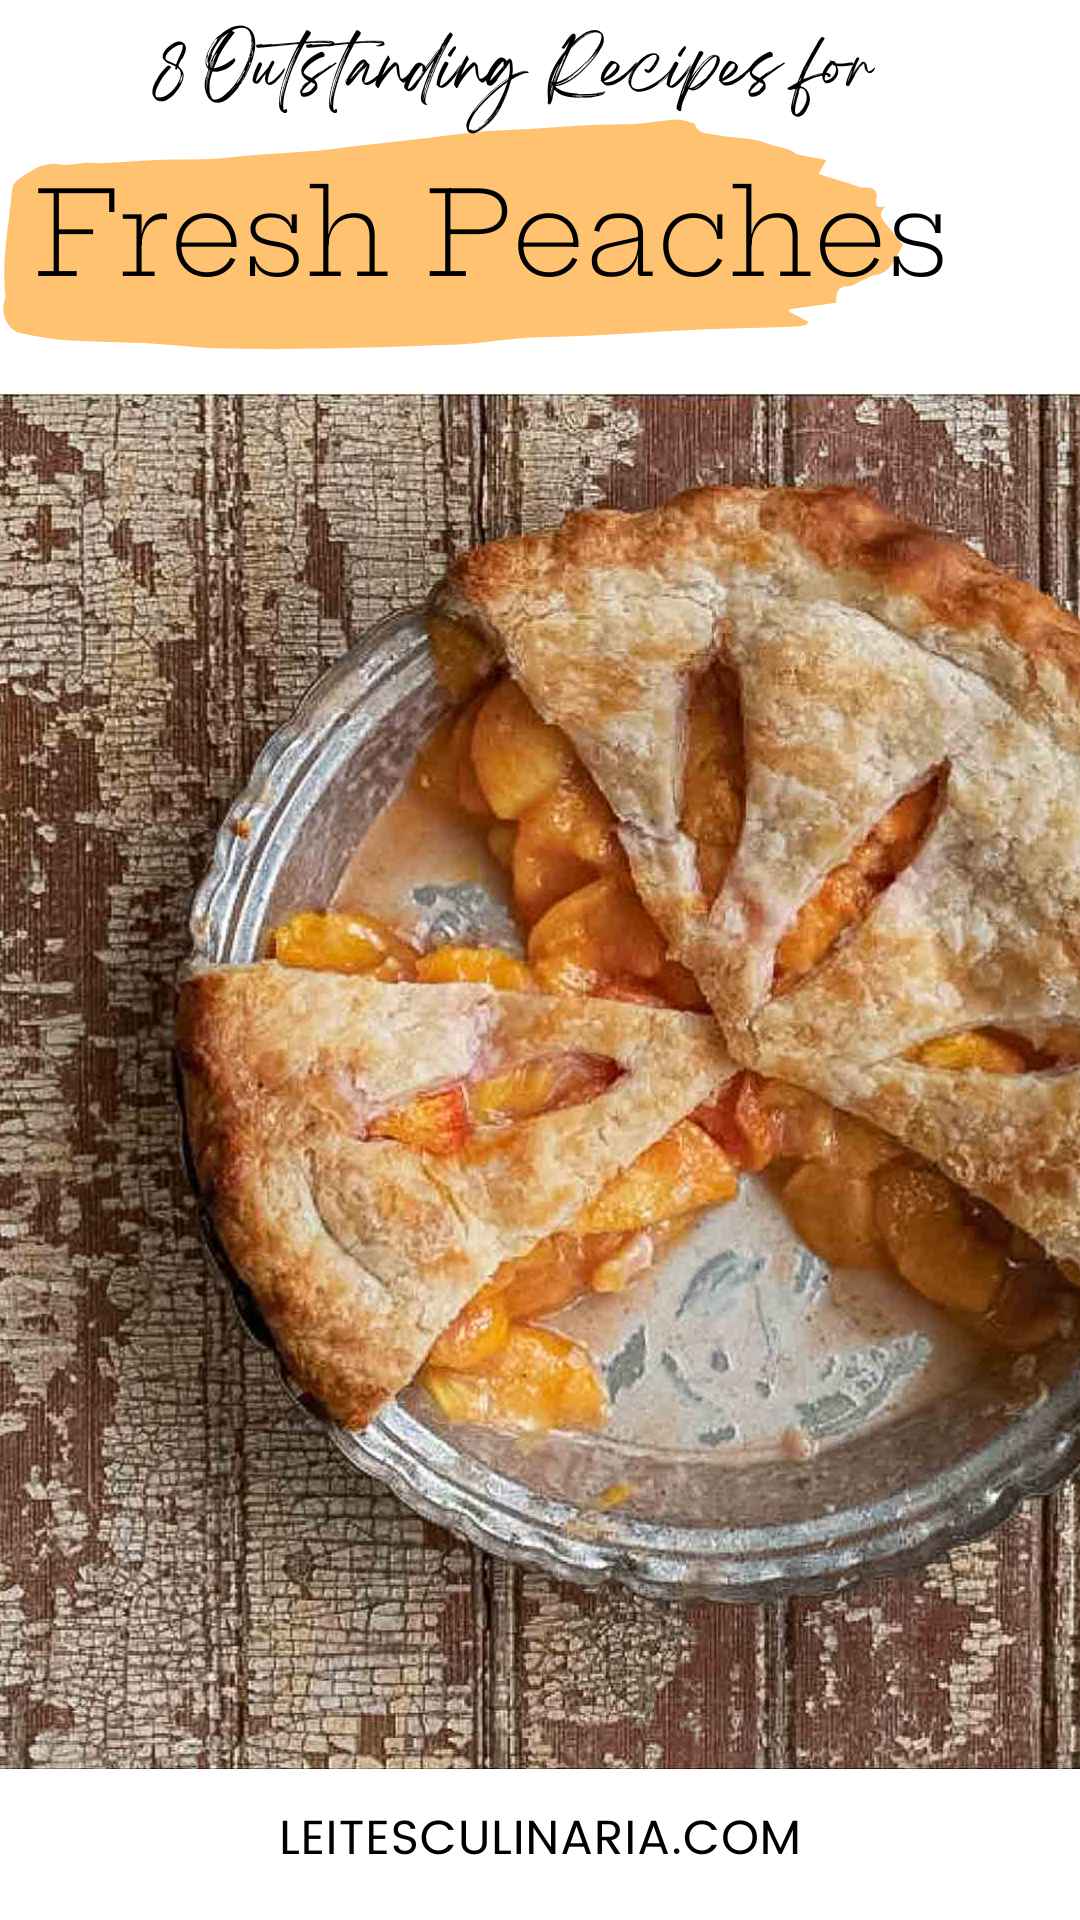 A fresh peach pie with a few slices missing.